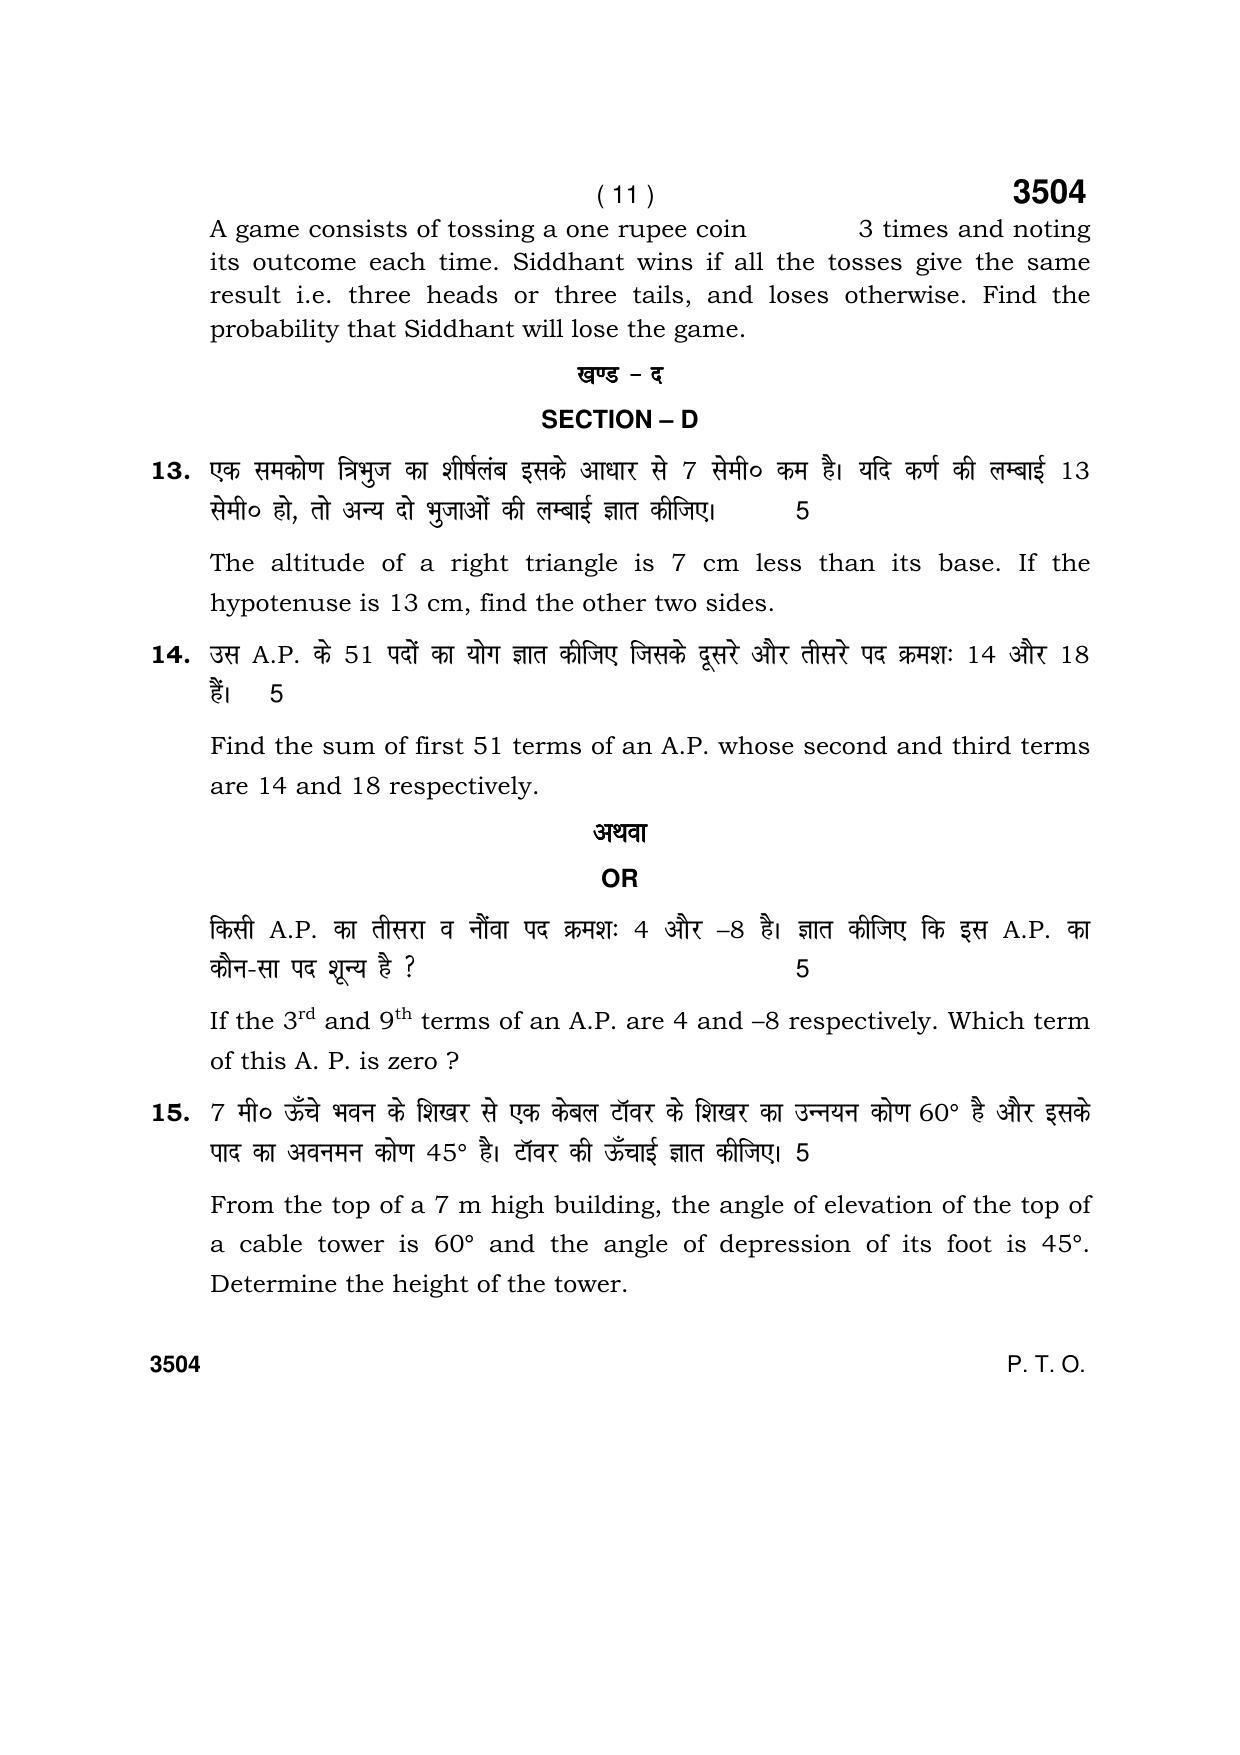 Haryana Board HBSE Class 10 Mathematics (Blind c) 2018 Question Paper - Page 11